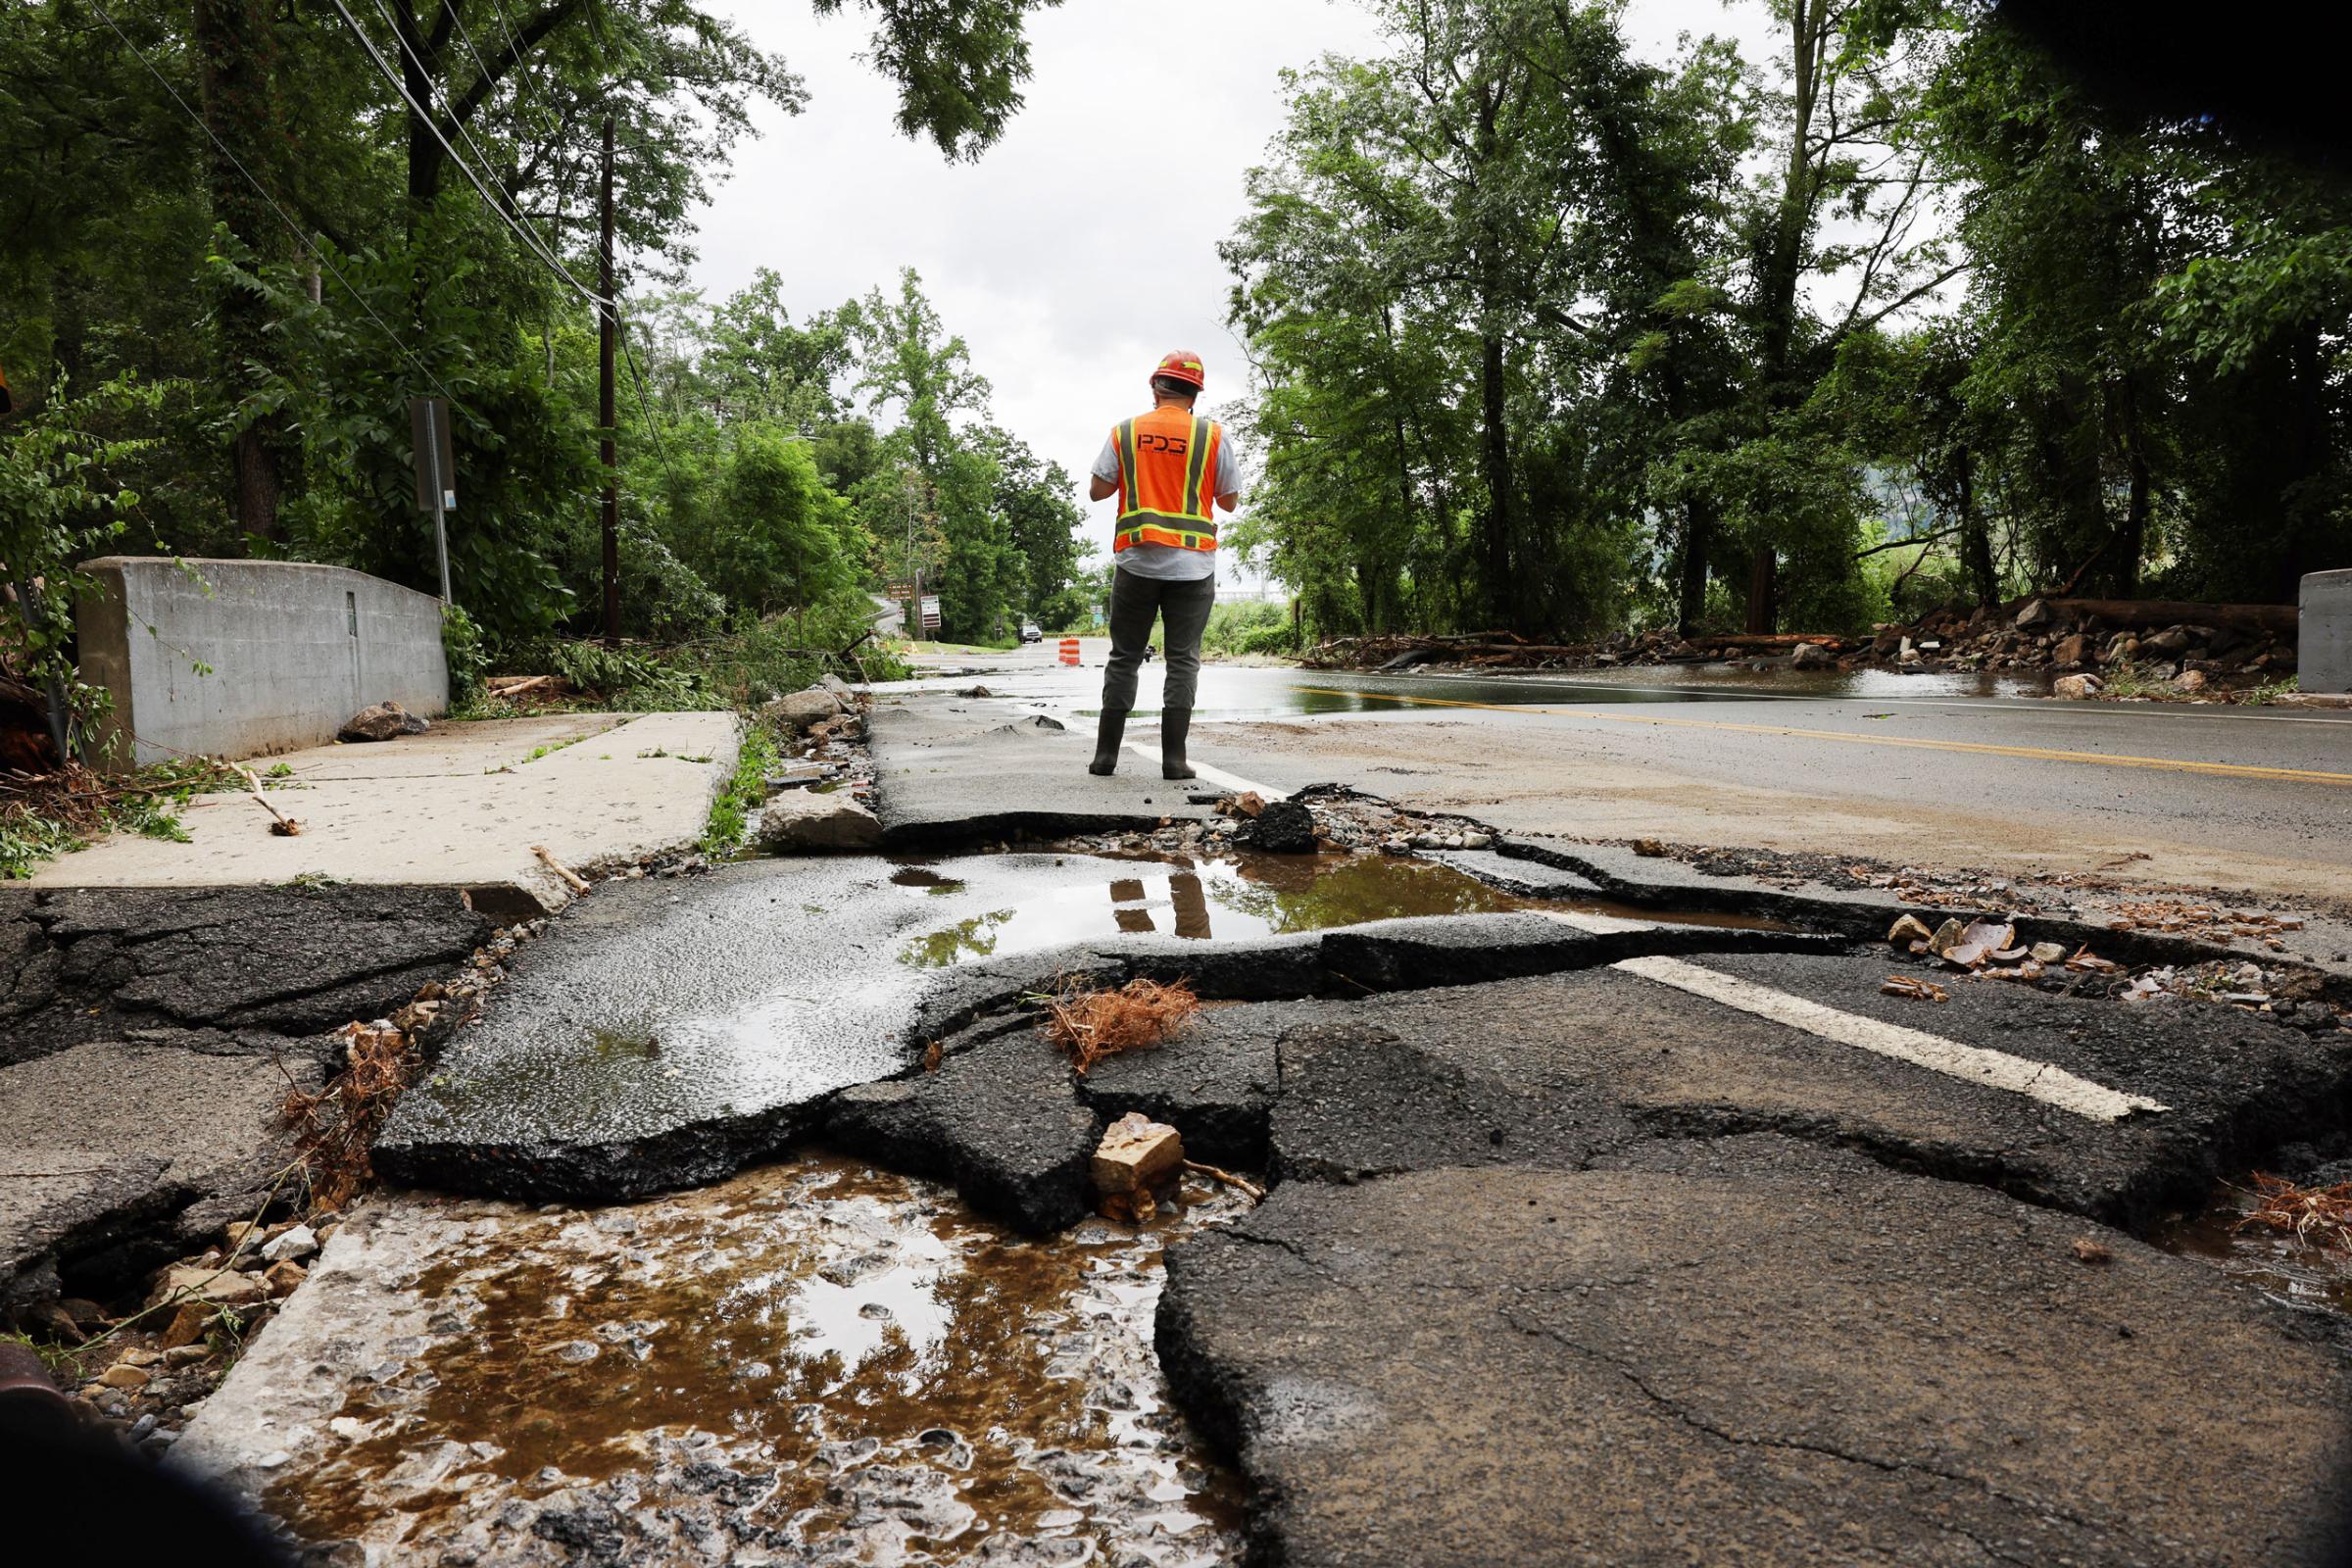 Workers survey a severely damaged road near Bear Mountain State Park following a night of heavy rain